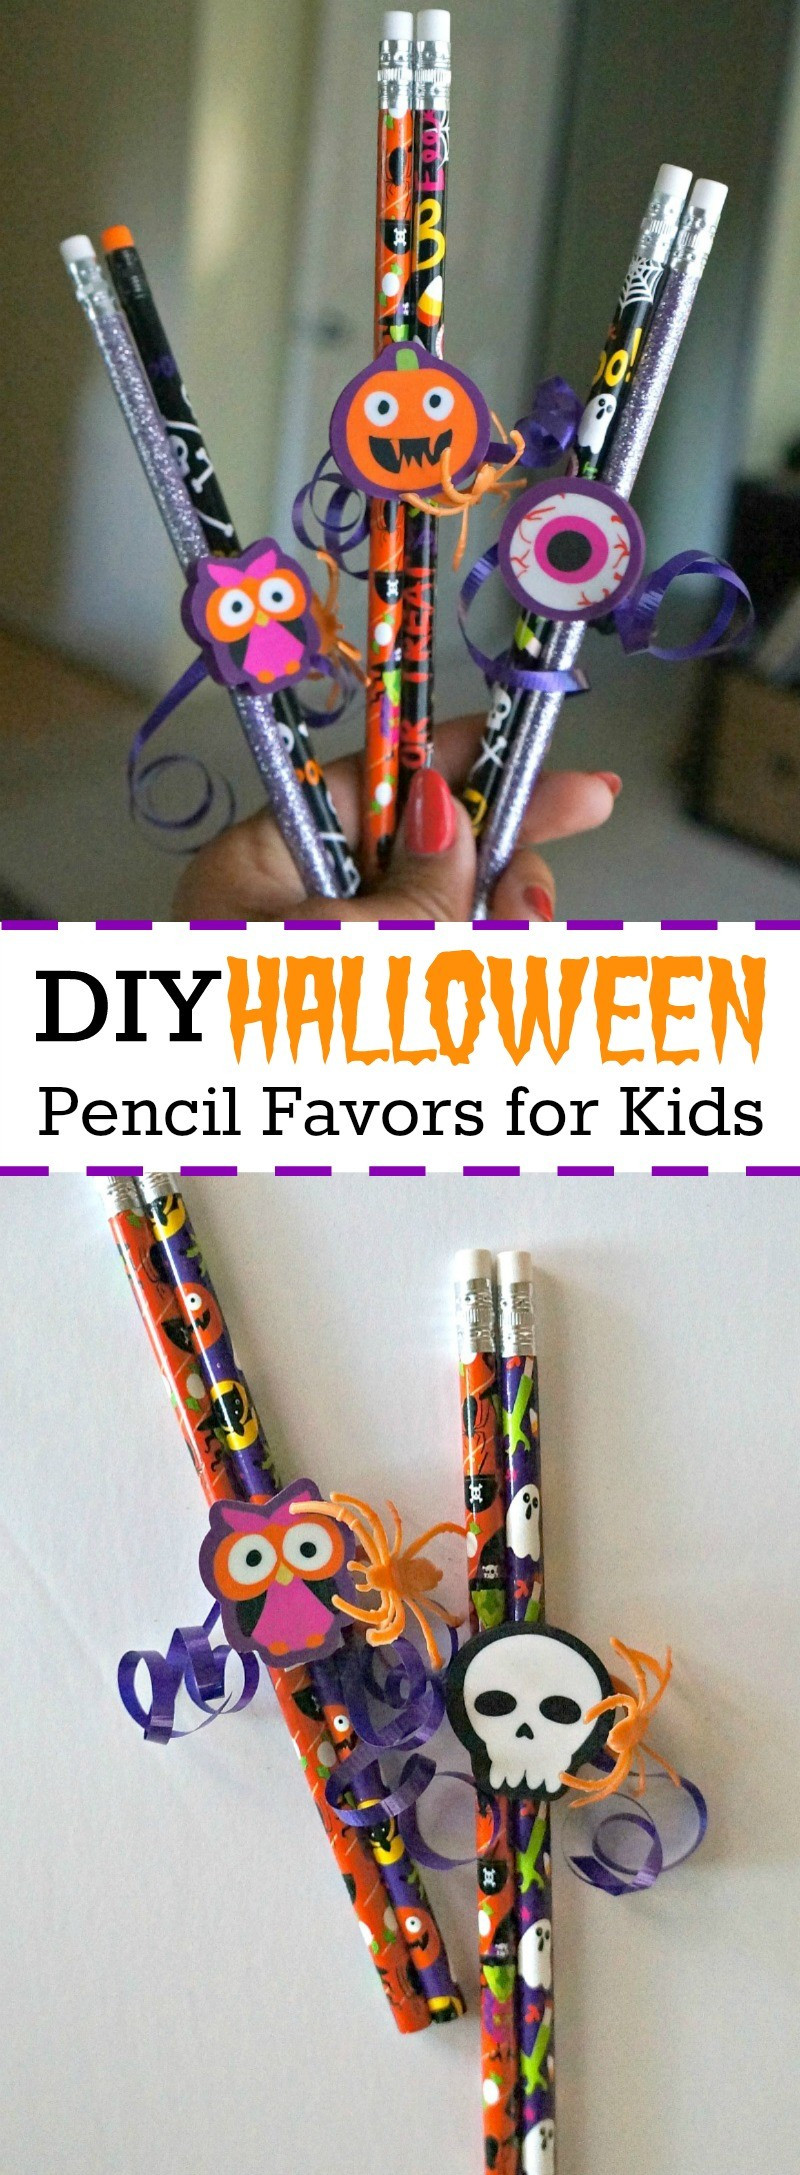 DIY Party Favours For Kids
 DIY Halloween Pencil Party Favors for Kids No Candy